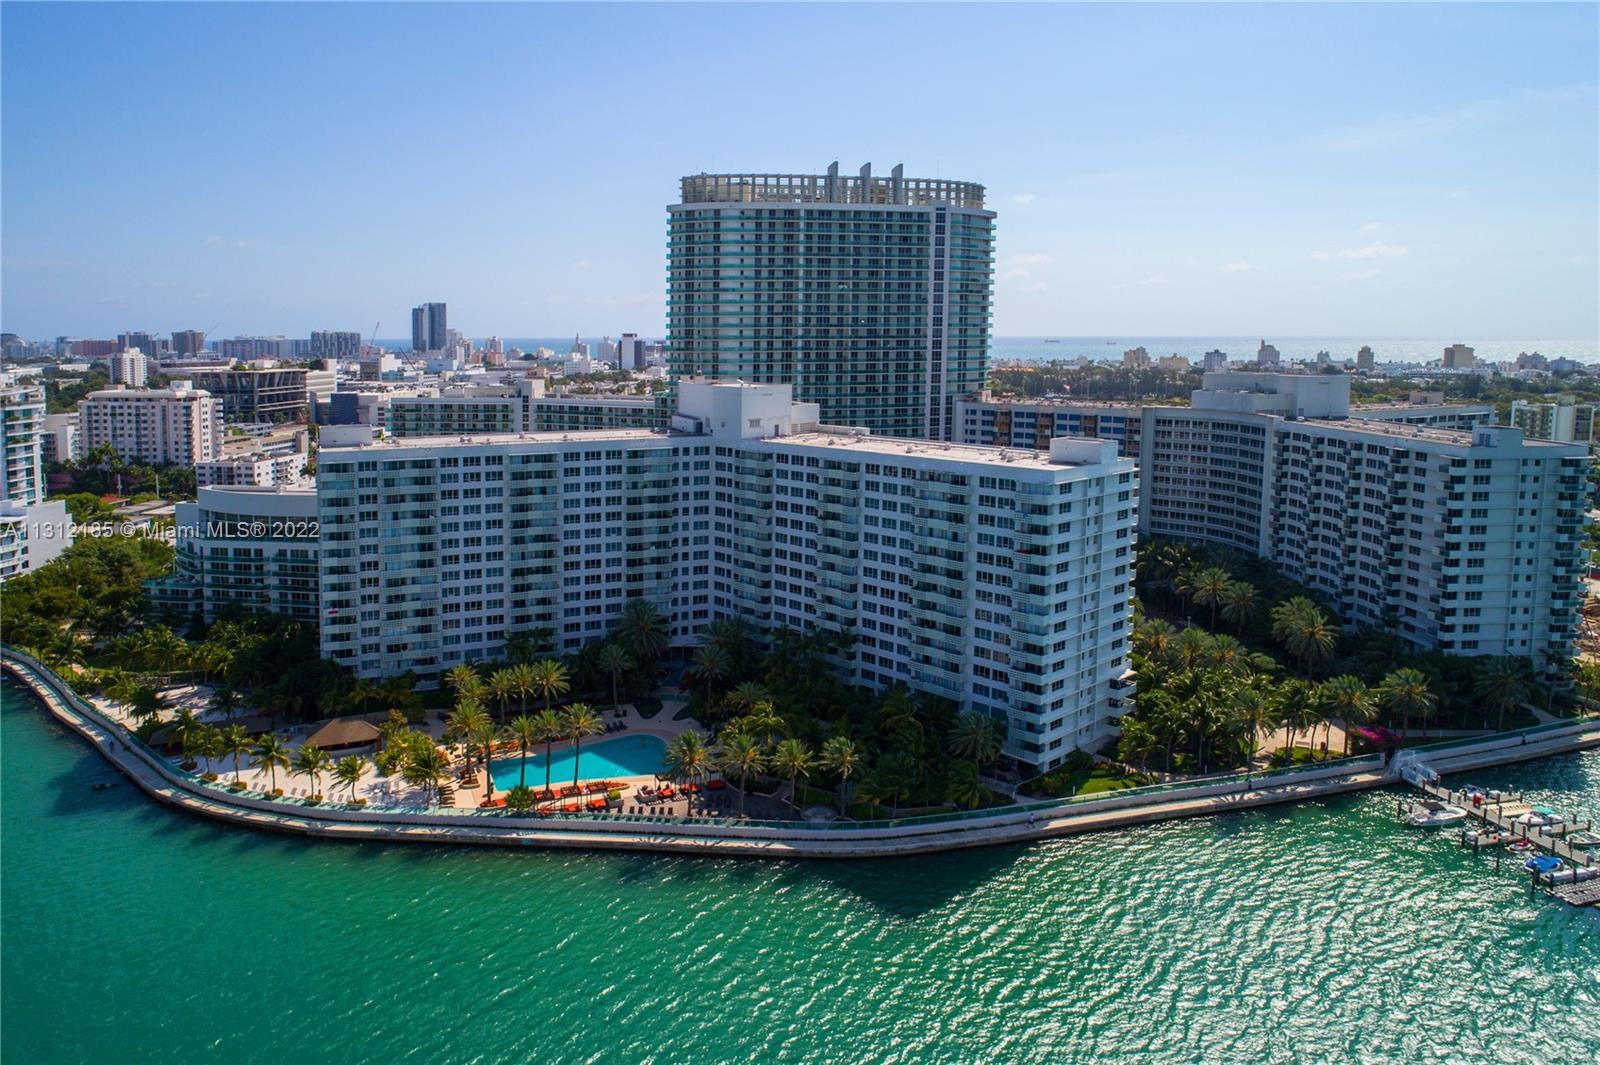 BREATHTAKING views over Infinity pool and Bay of Biscayne and downtown Miami, spectacular at day and